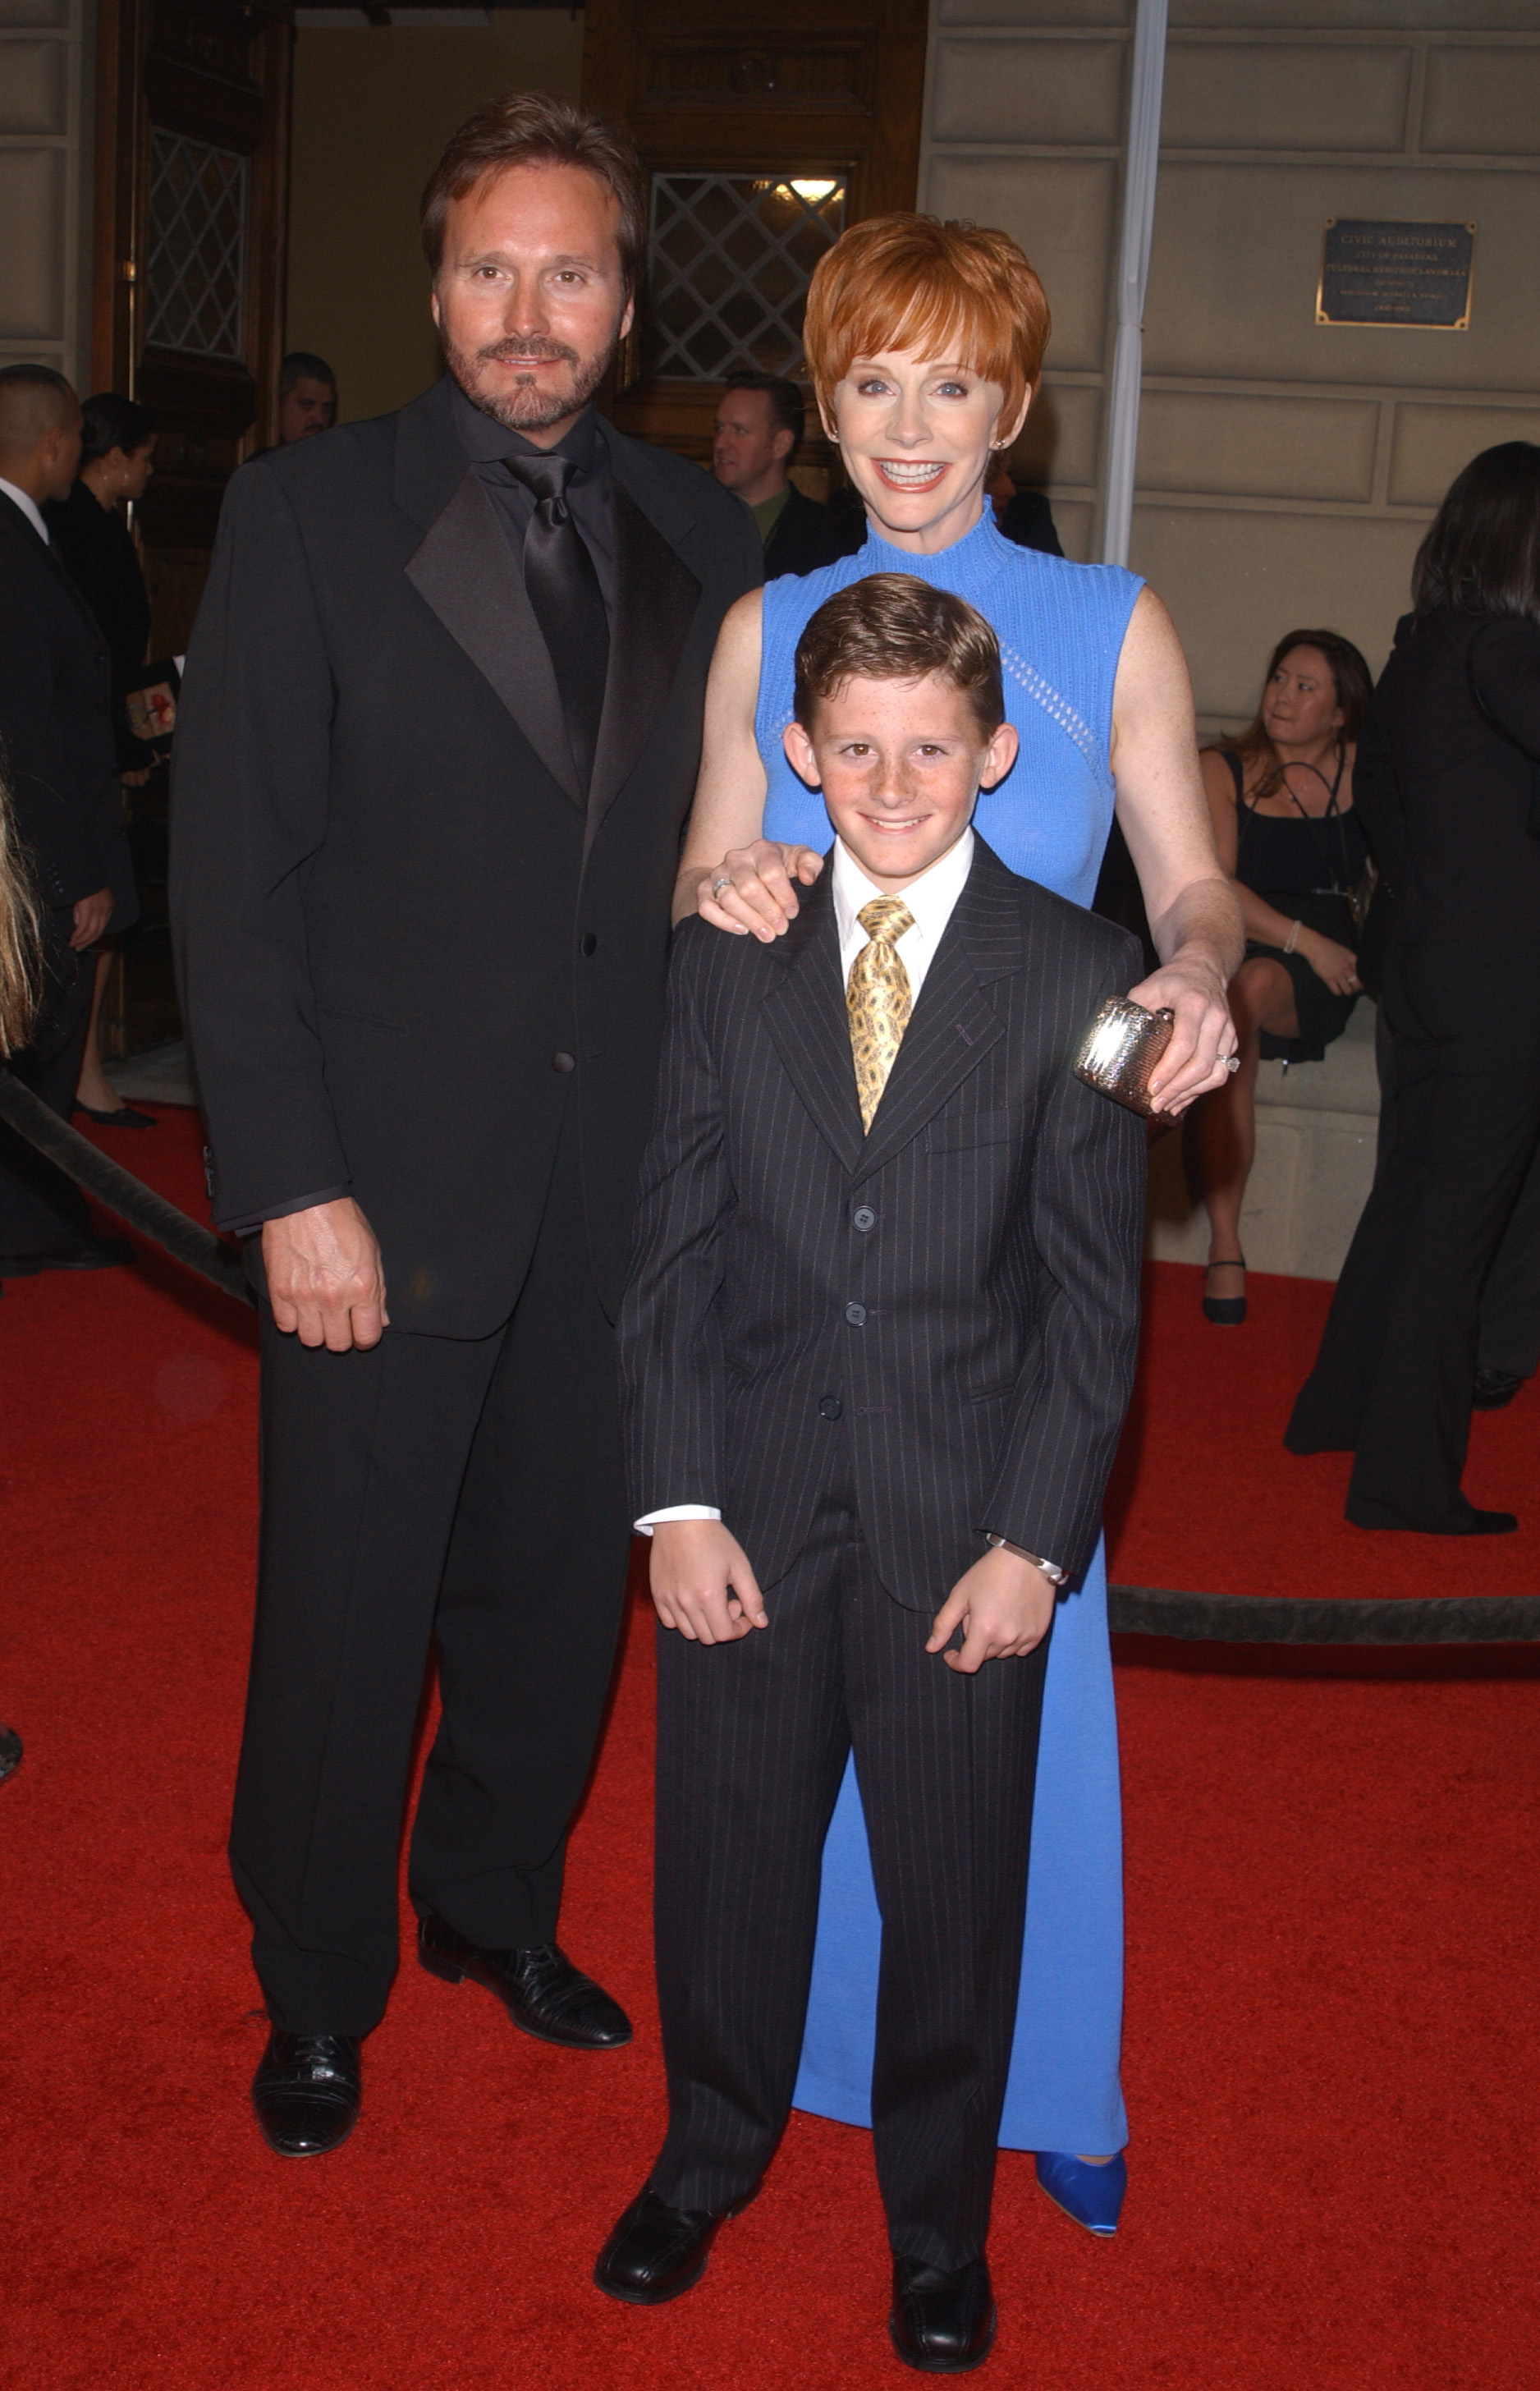 Reba McEntire with husband Narville Blackstock and son Shelby at the 28th annual People's Choice Awards on January 13, 2002. | Source: Getty Images.